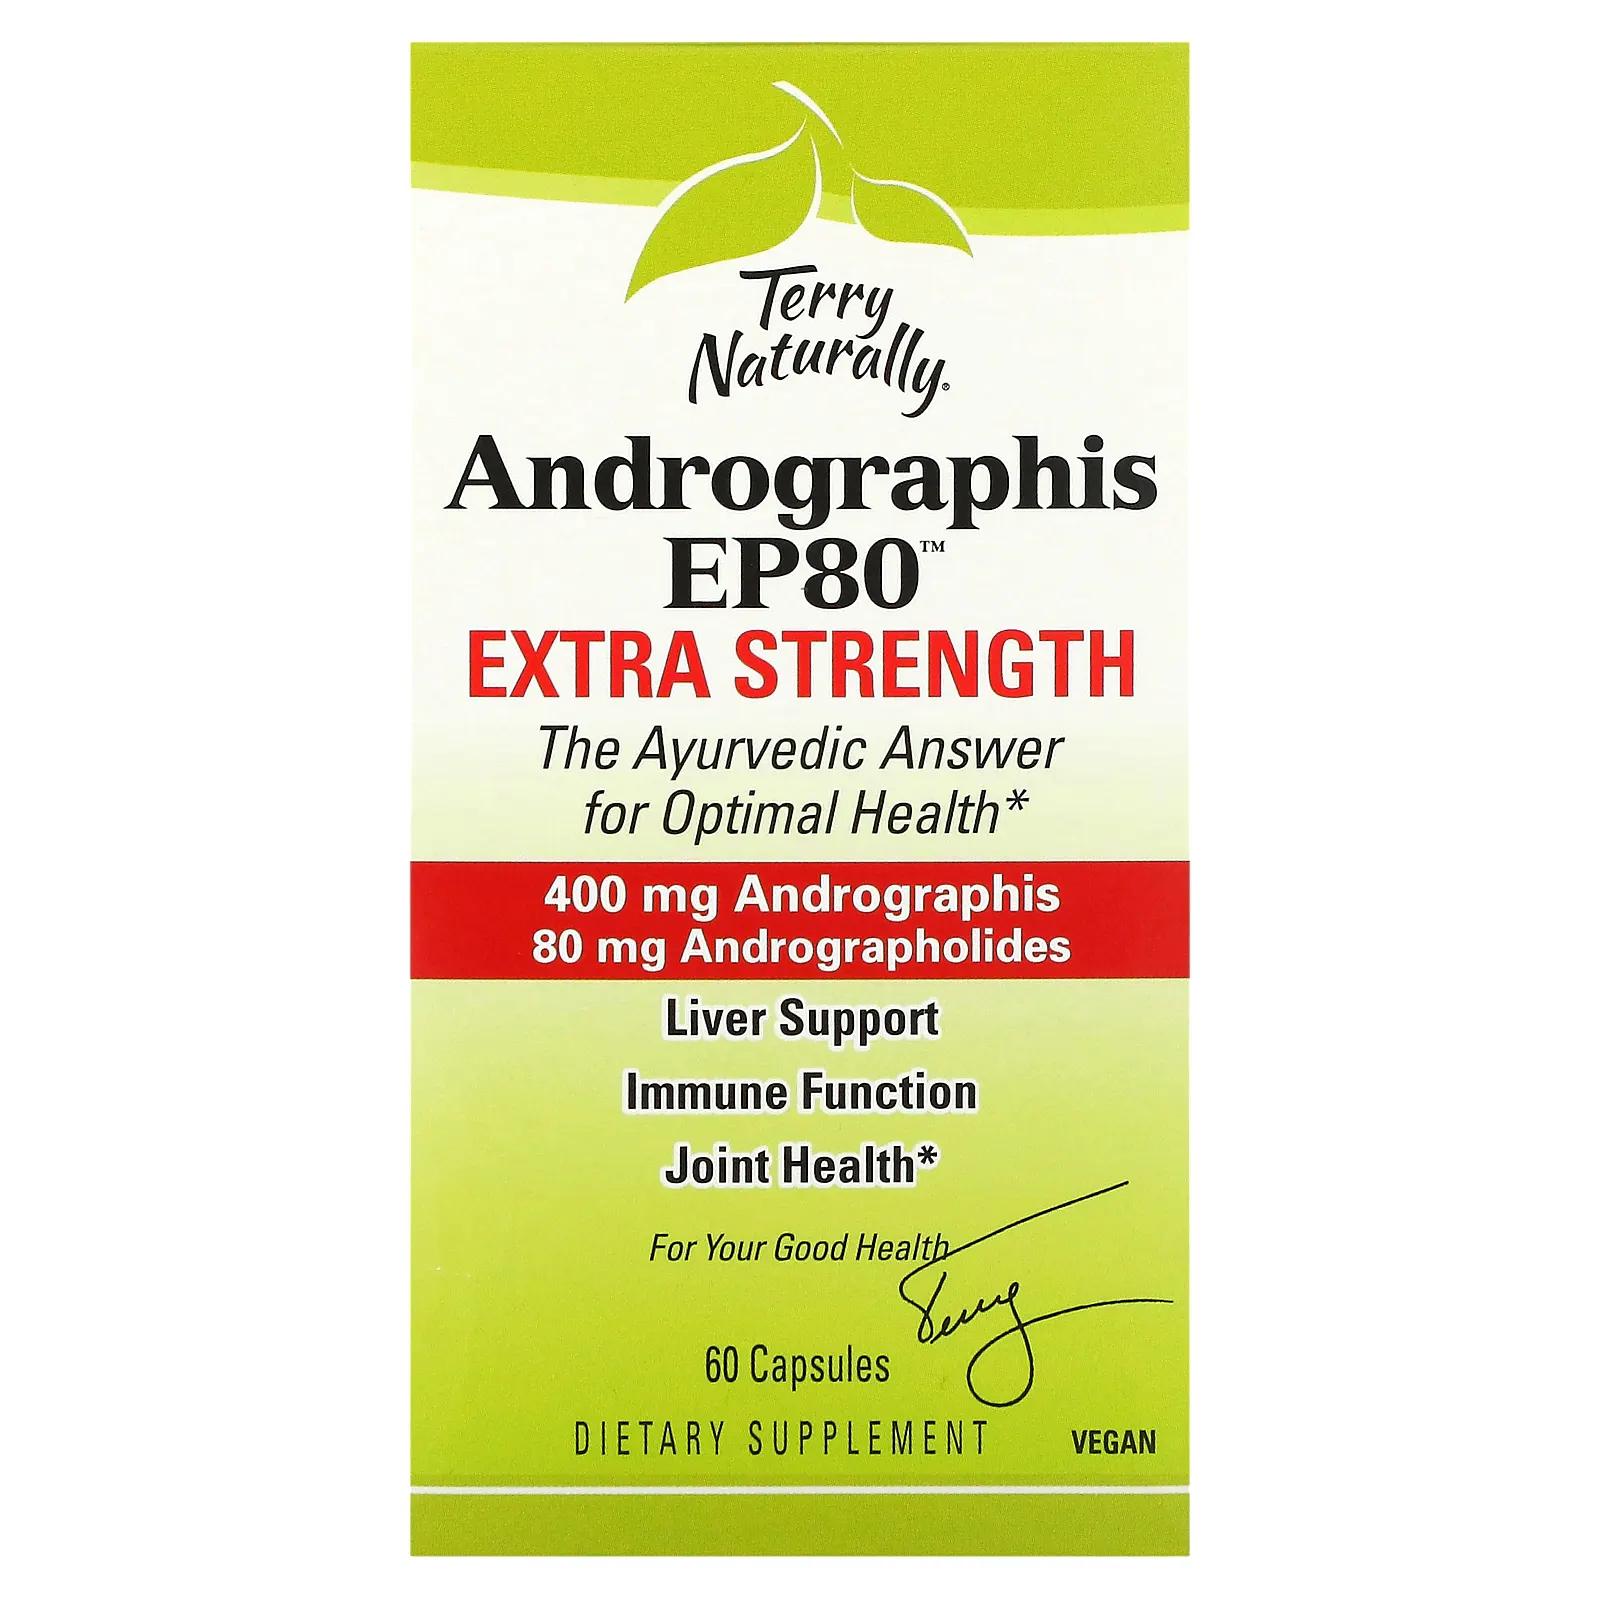 Terry Naturally Andrographis EP80 Extra Strength 60 Capsules цена и фото